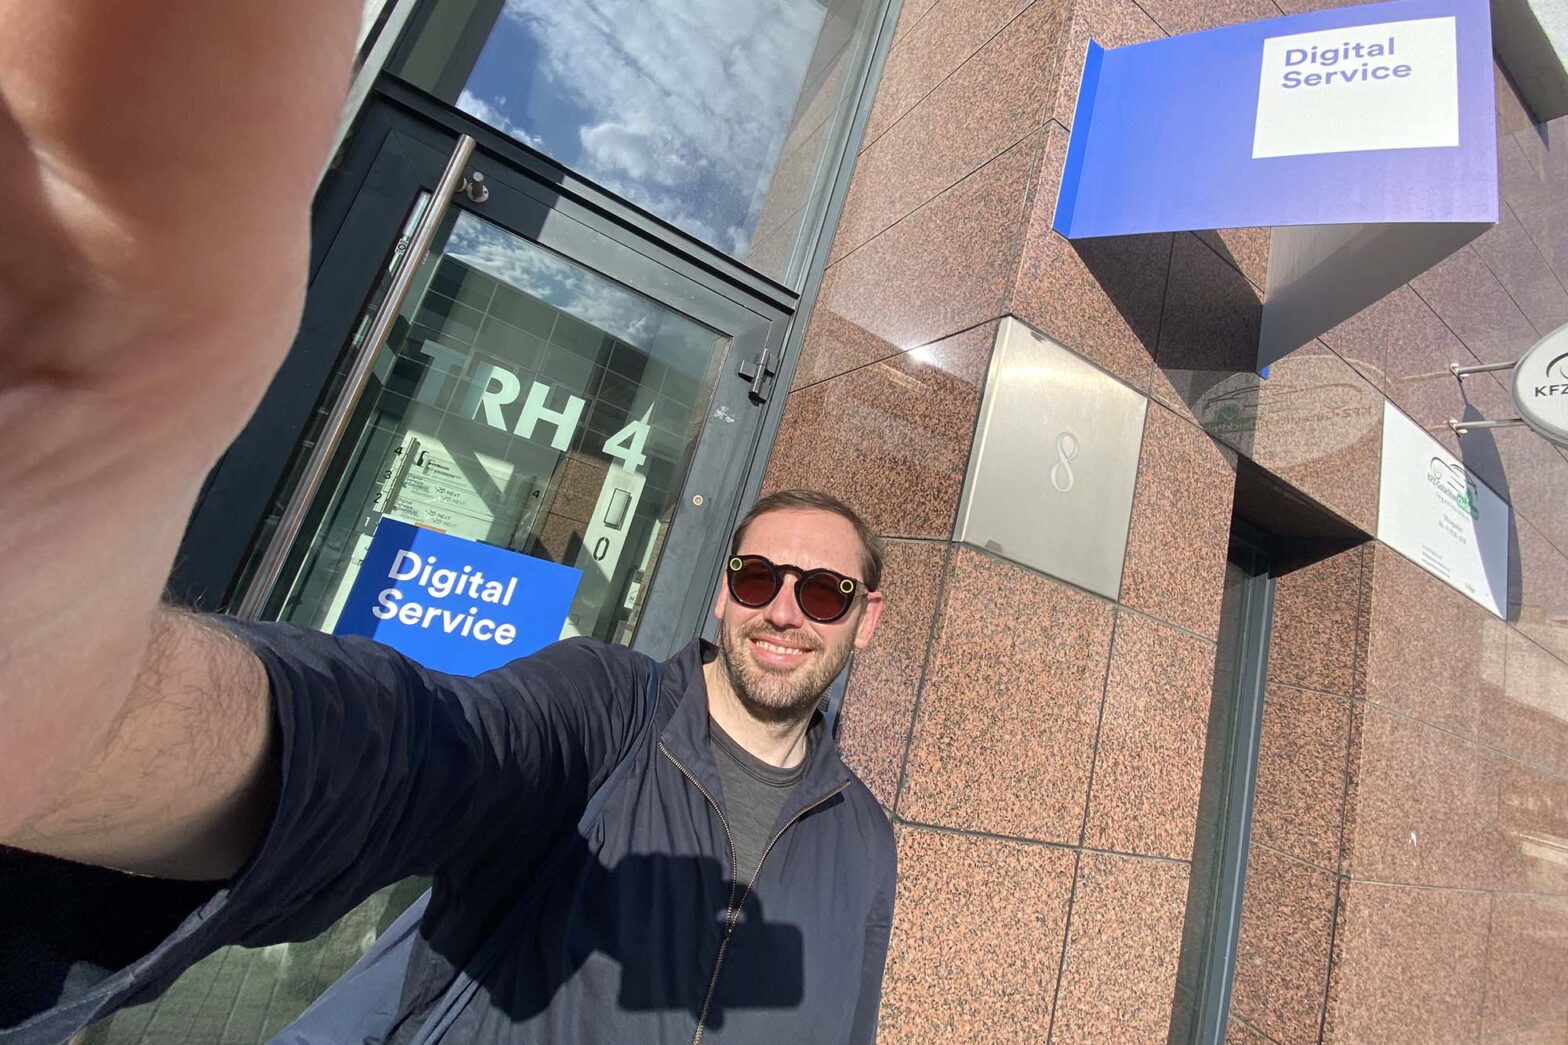 Selfie of Martin Jordan, new Head of Design at the German government’s Digital Service in front of the outside door – with 2 signs saying Digital Service in the background